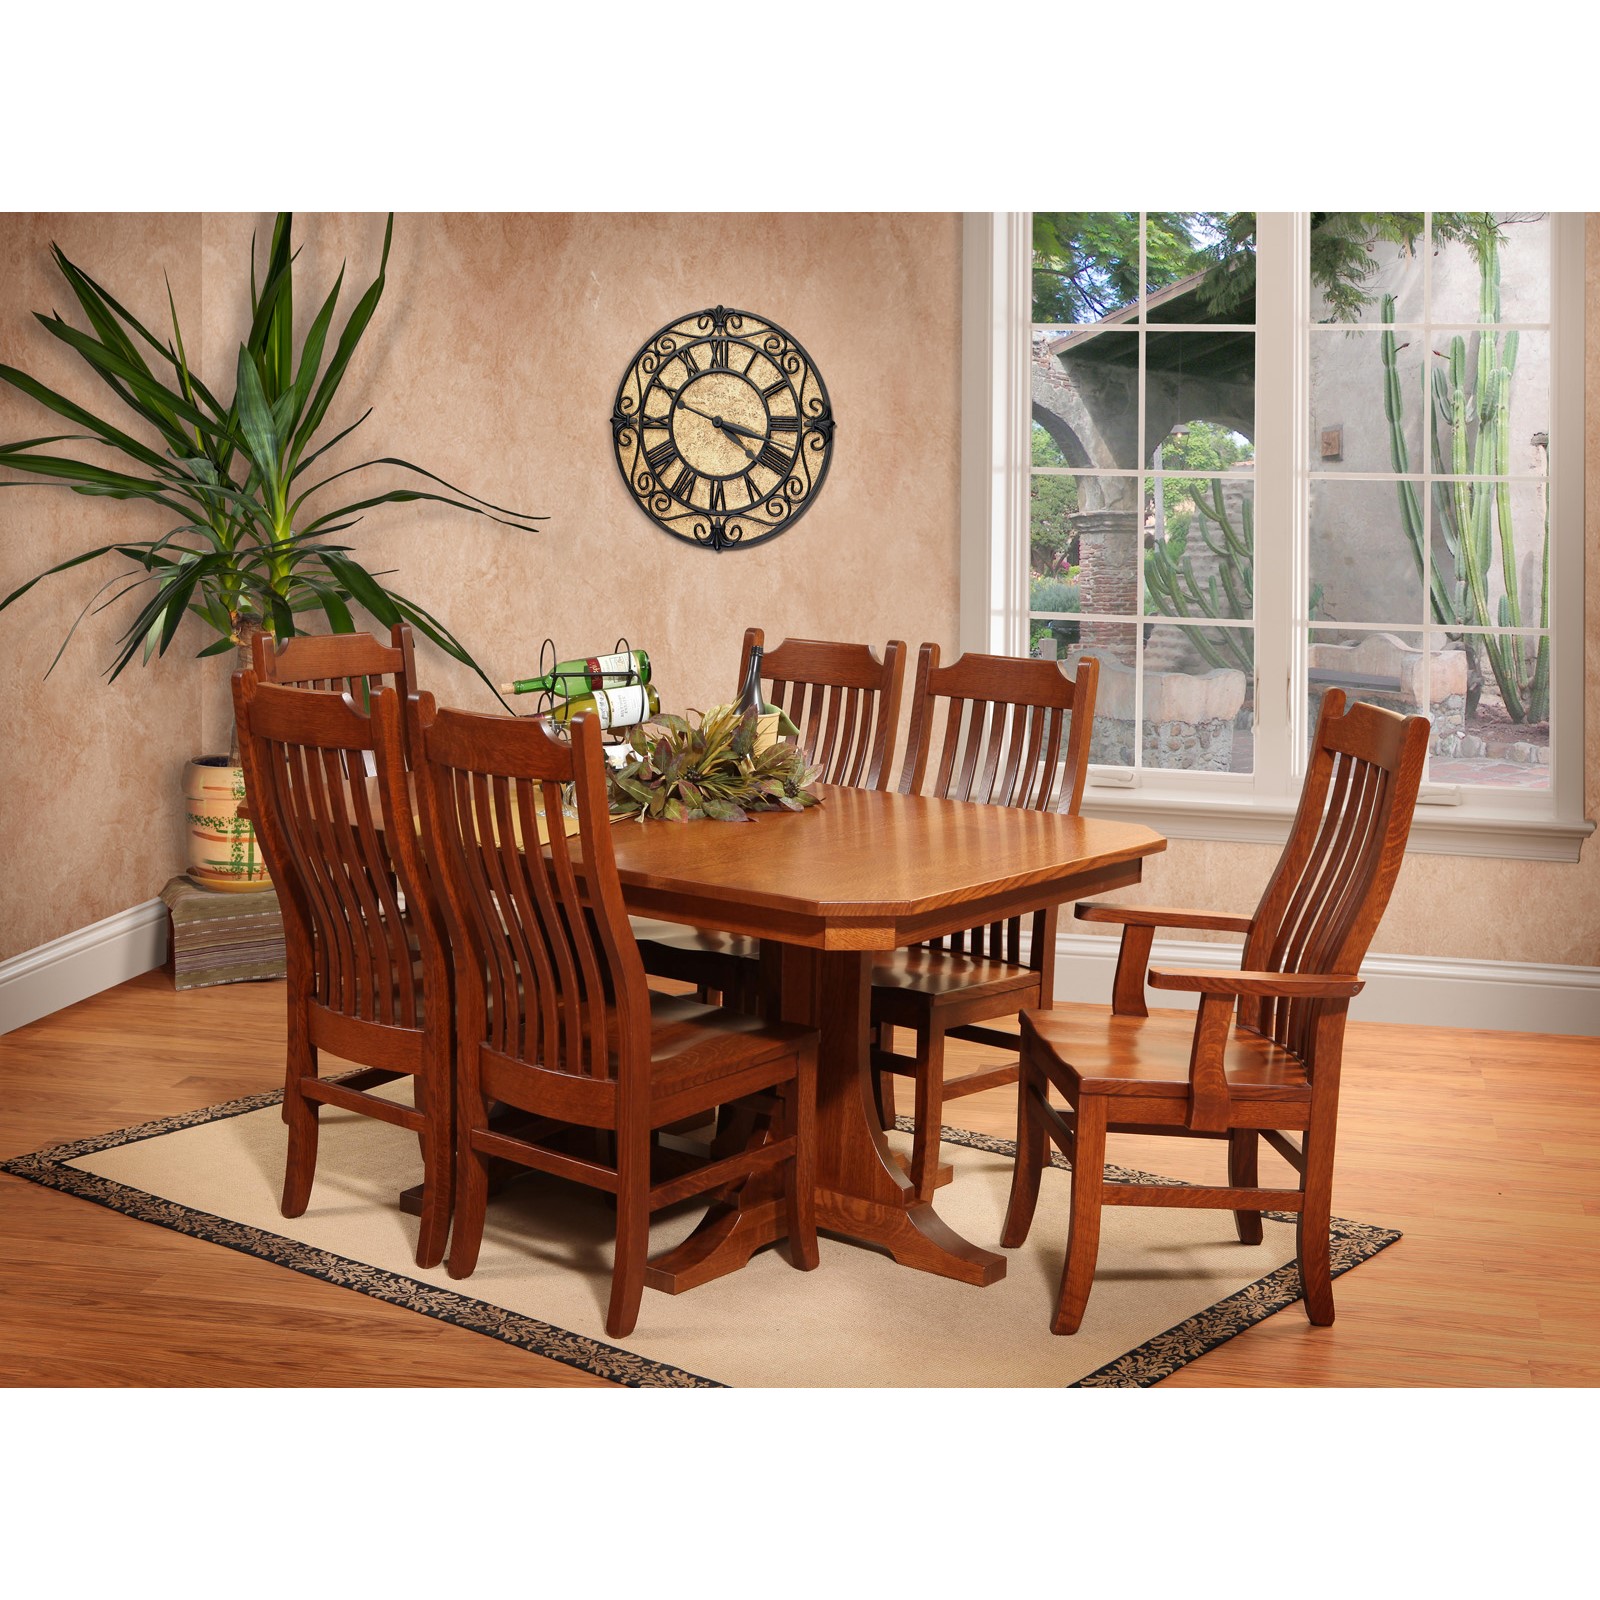 Copper Canyon Dining Room Set By, Red Oak Dining Room Table Chairs